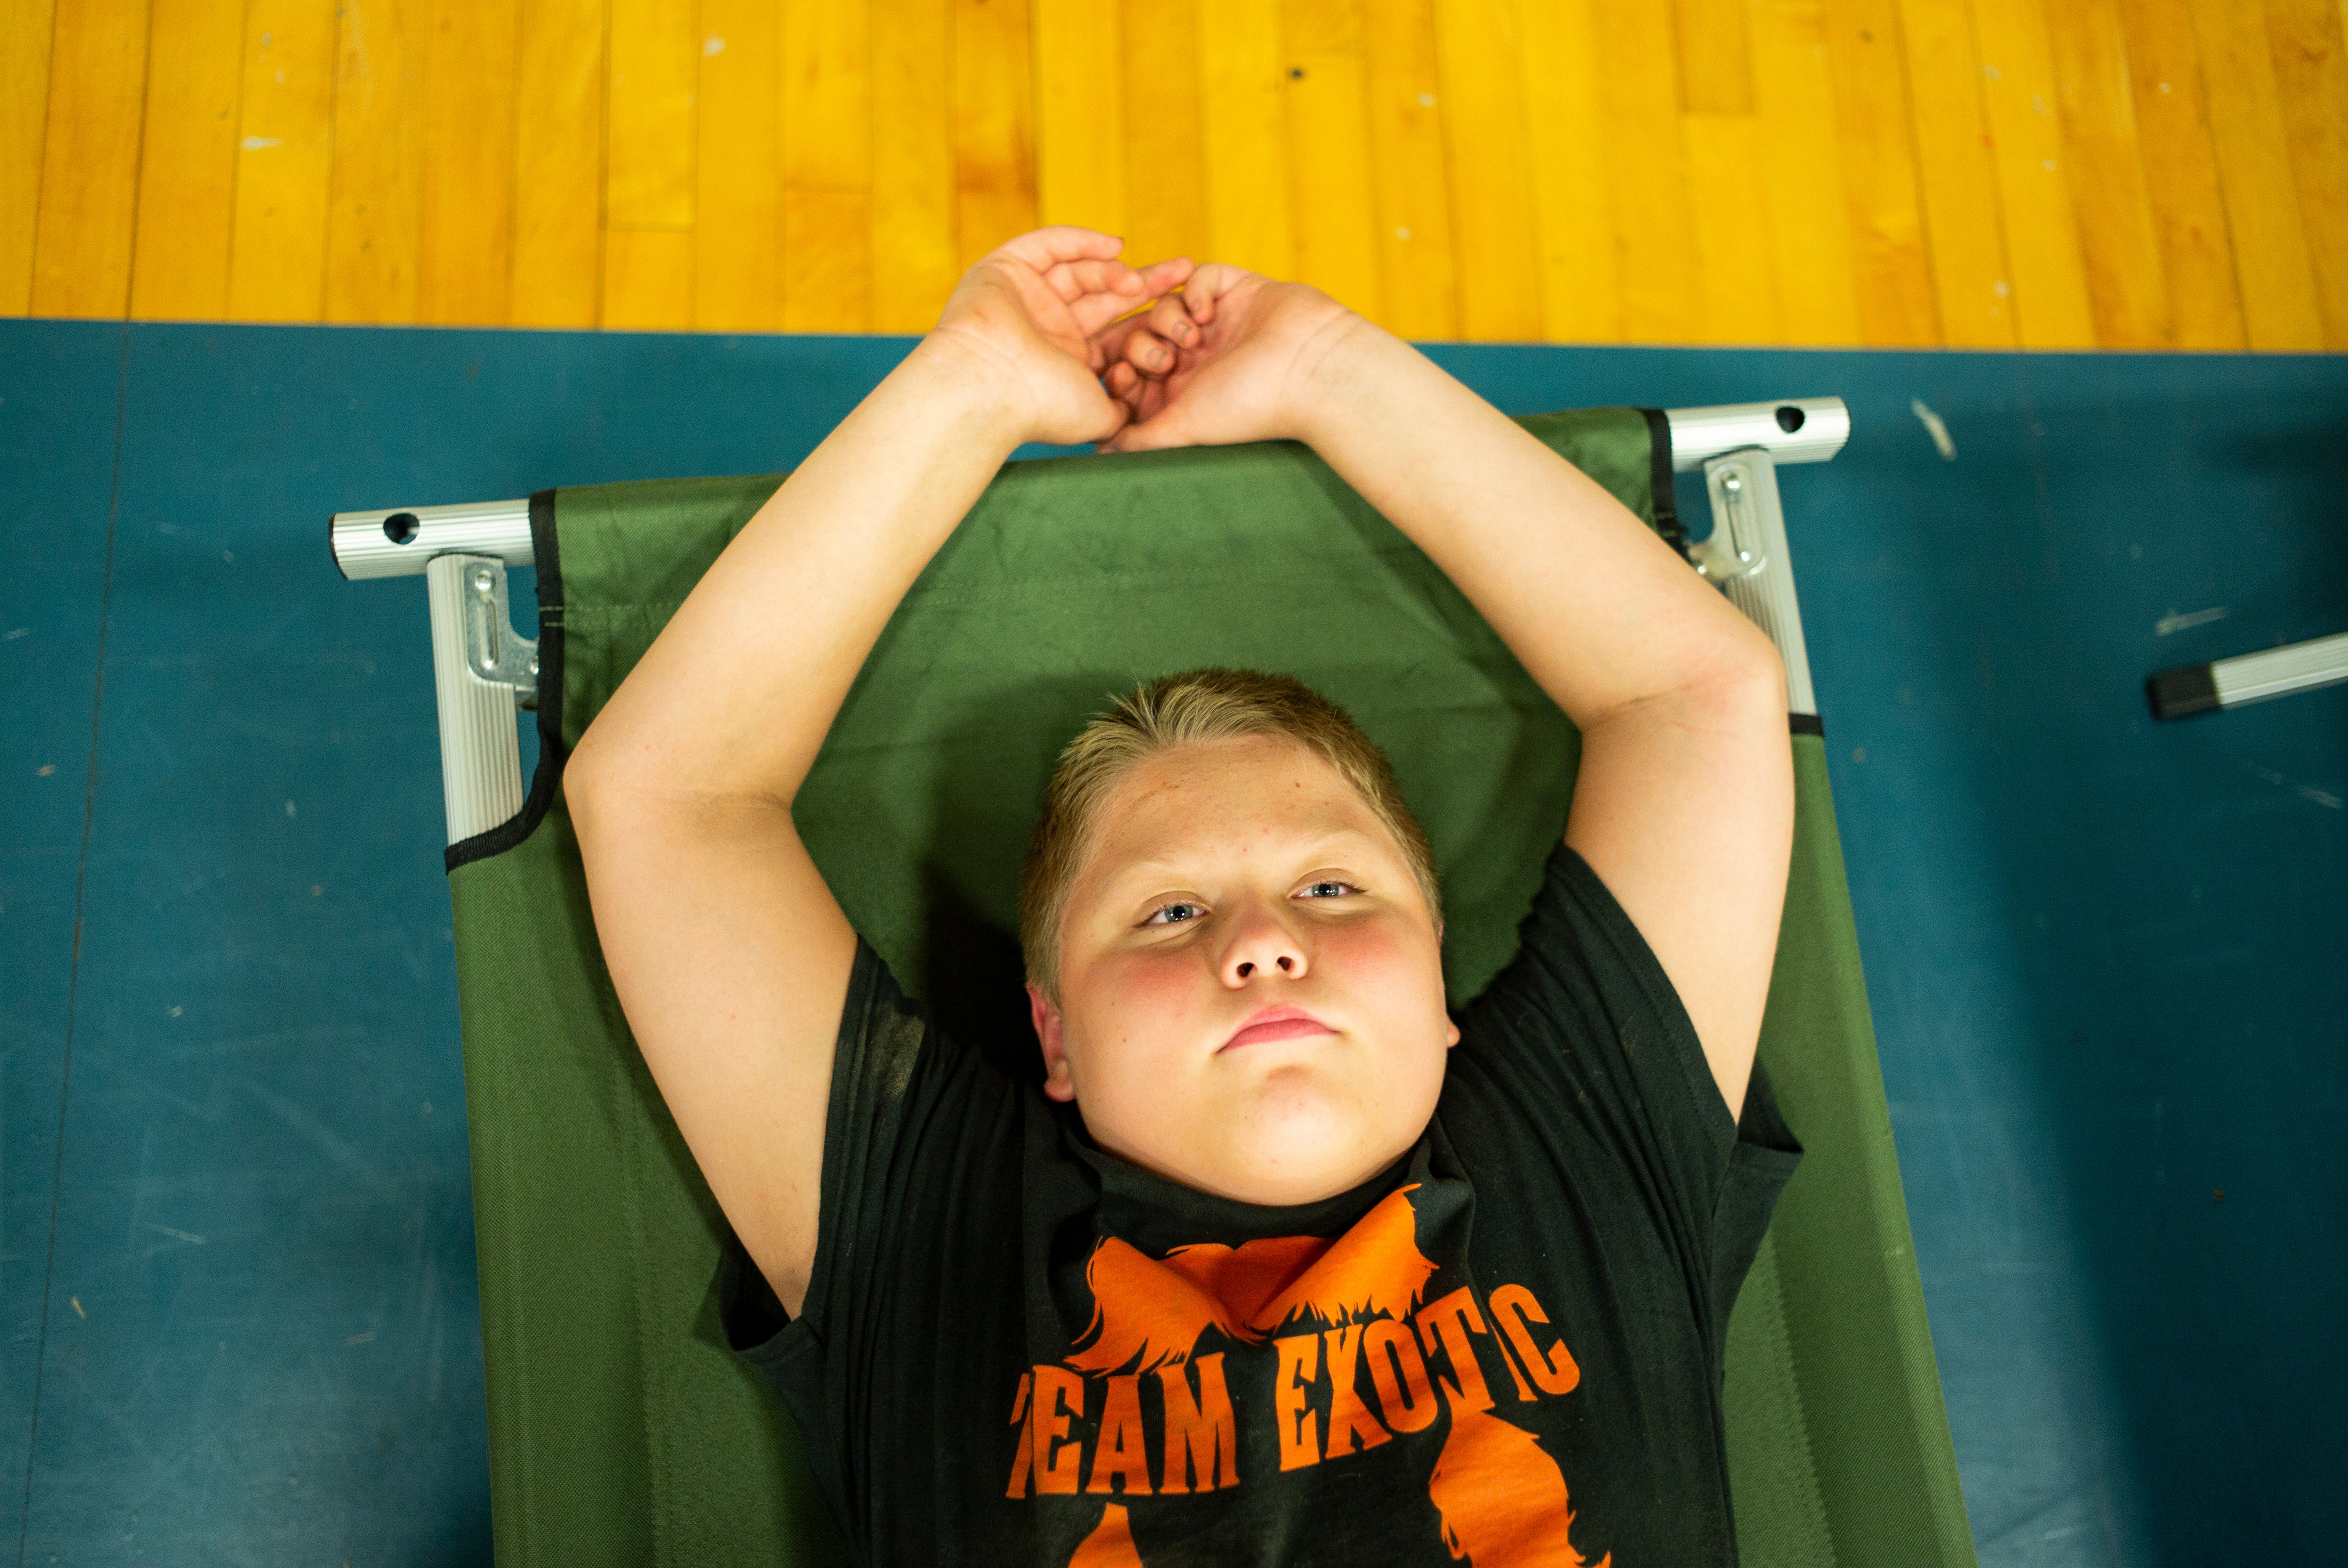 Zachary Stivers, 11, of Lost Creek, Kentucky, rests on a cot in the  Hazard Community & Technical College, where survivors of the major  flooding in Eastern Kentucky are being taken for shelter on July 28,  2022 in Breathitt County, Kentucky.  (Photo: Michael Swensen, Getty Images)